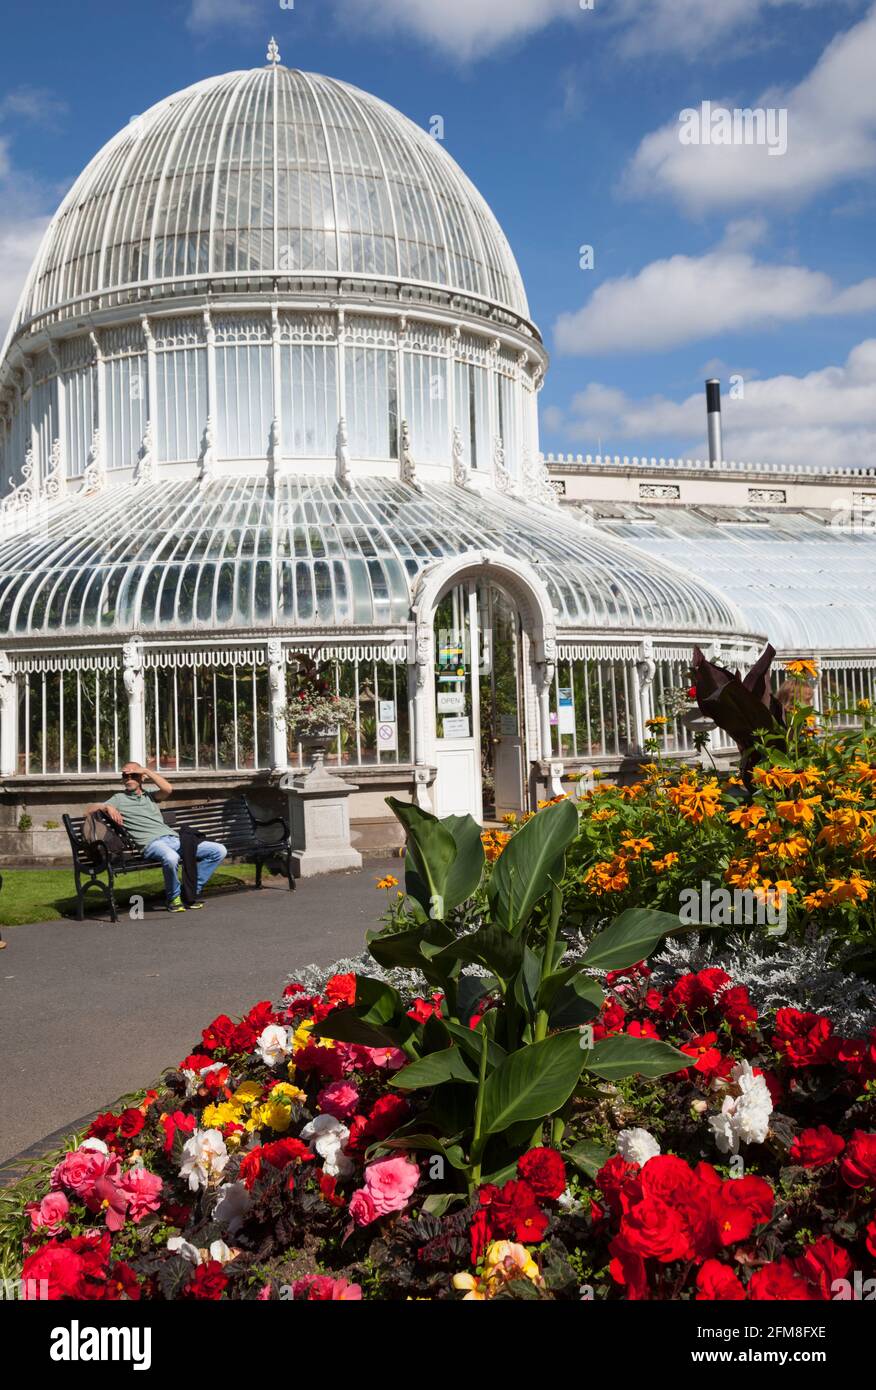 The glasshouse at the Botanical gardens, Belfast, Northern Ireland with the garden laid out with begonias. Stock Photo